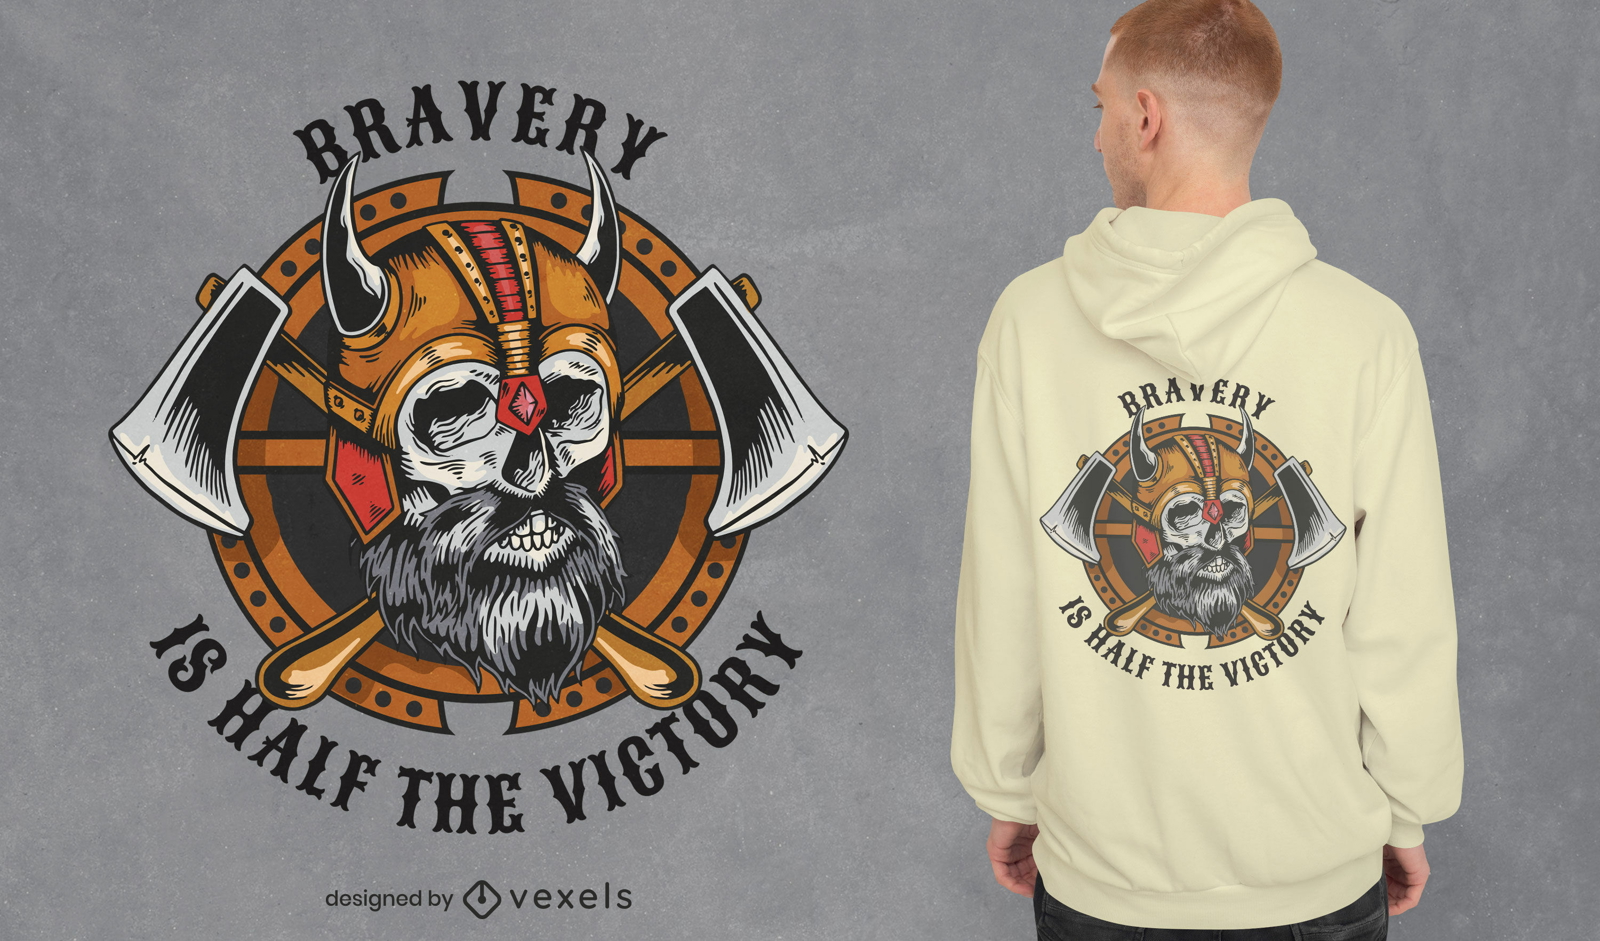 Viking skull and axes quote t-shirt design